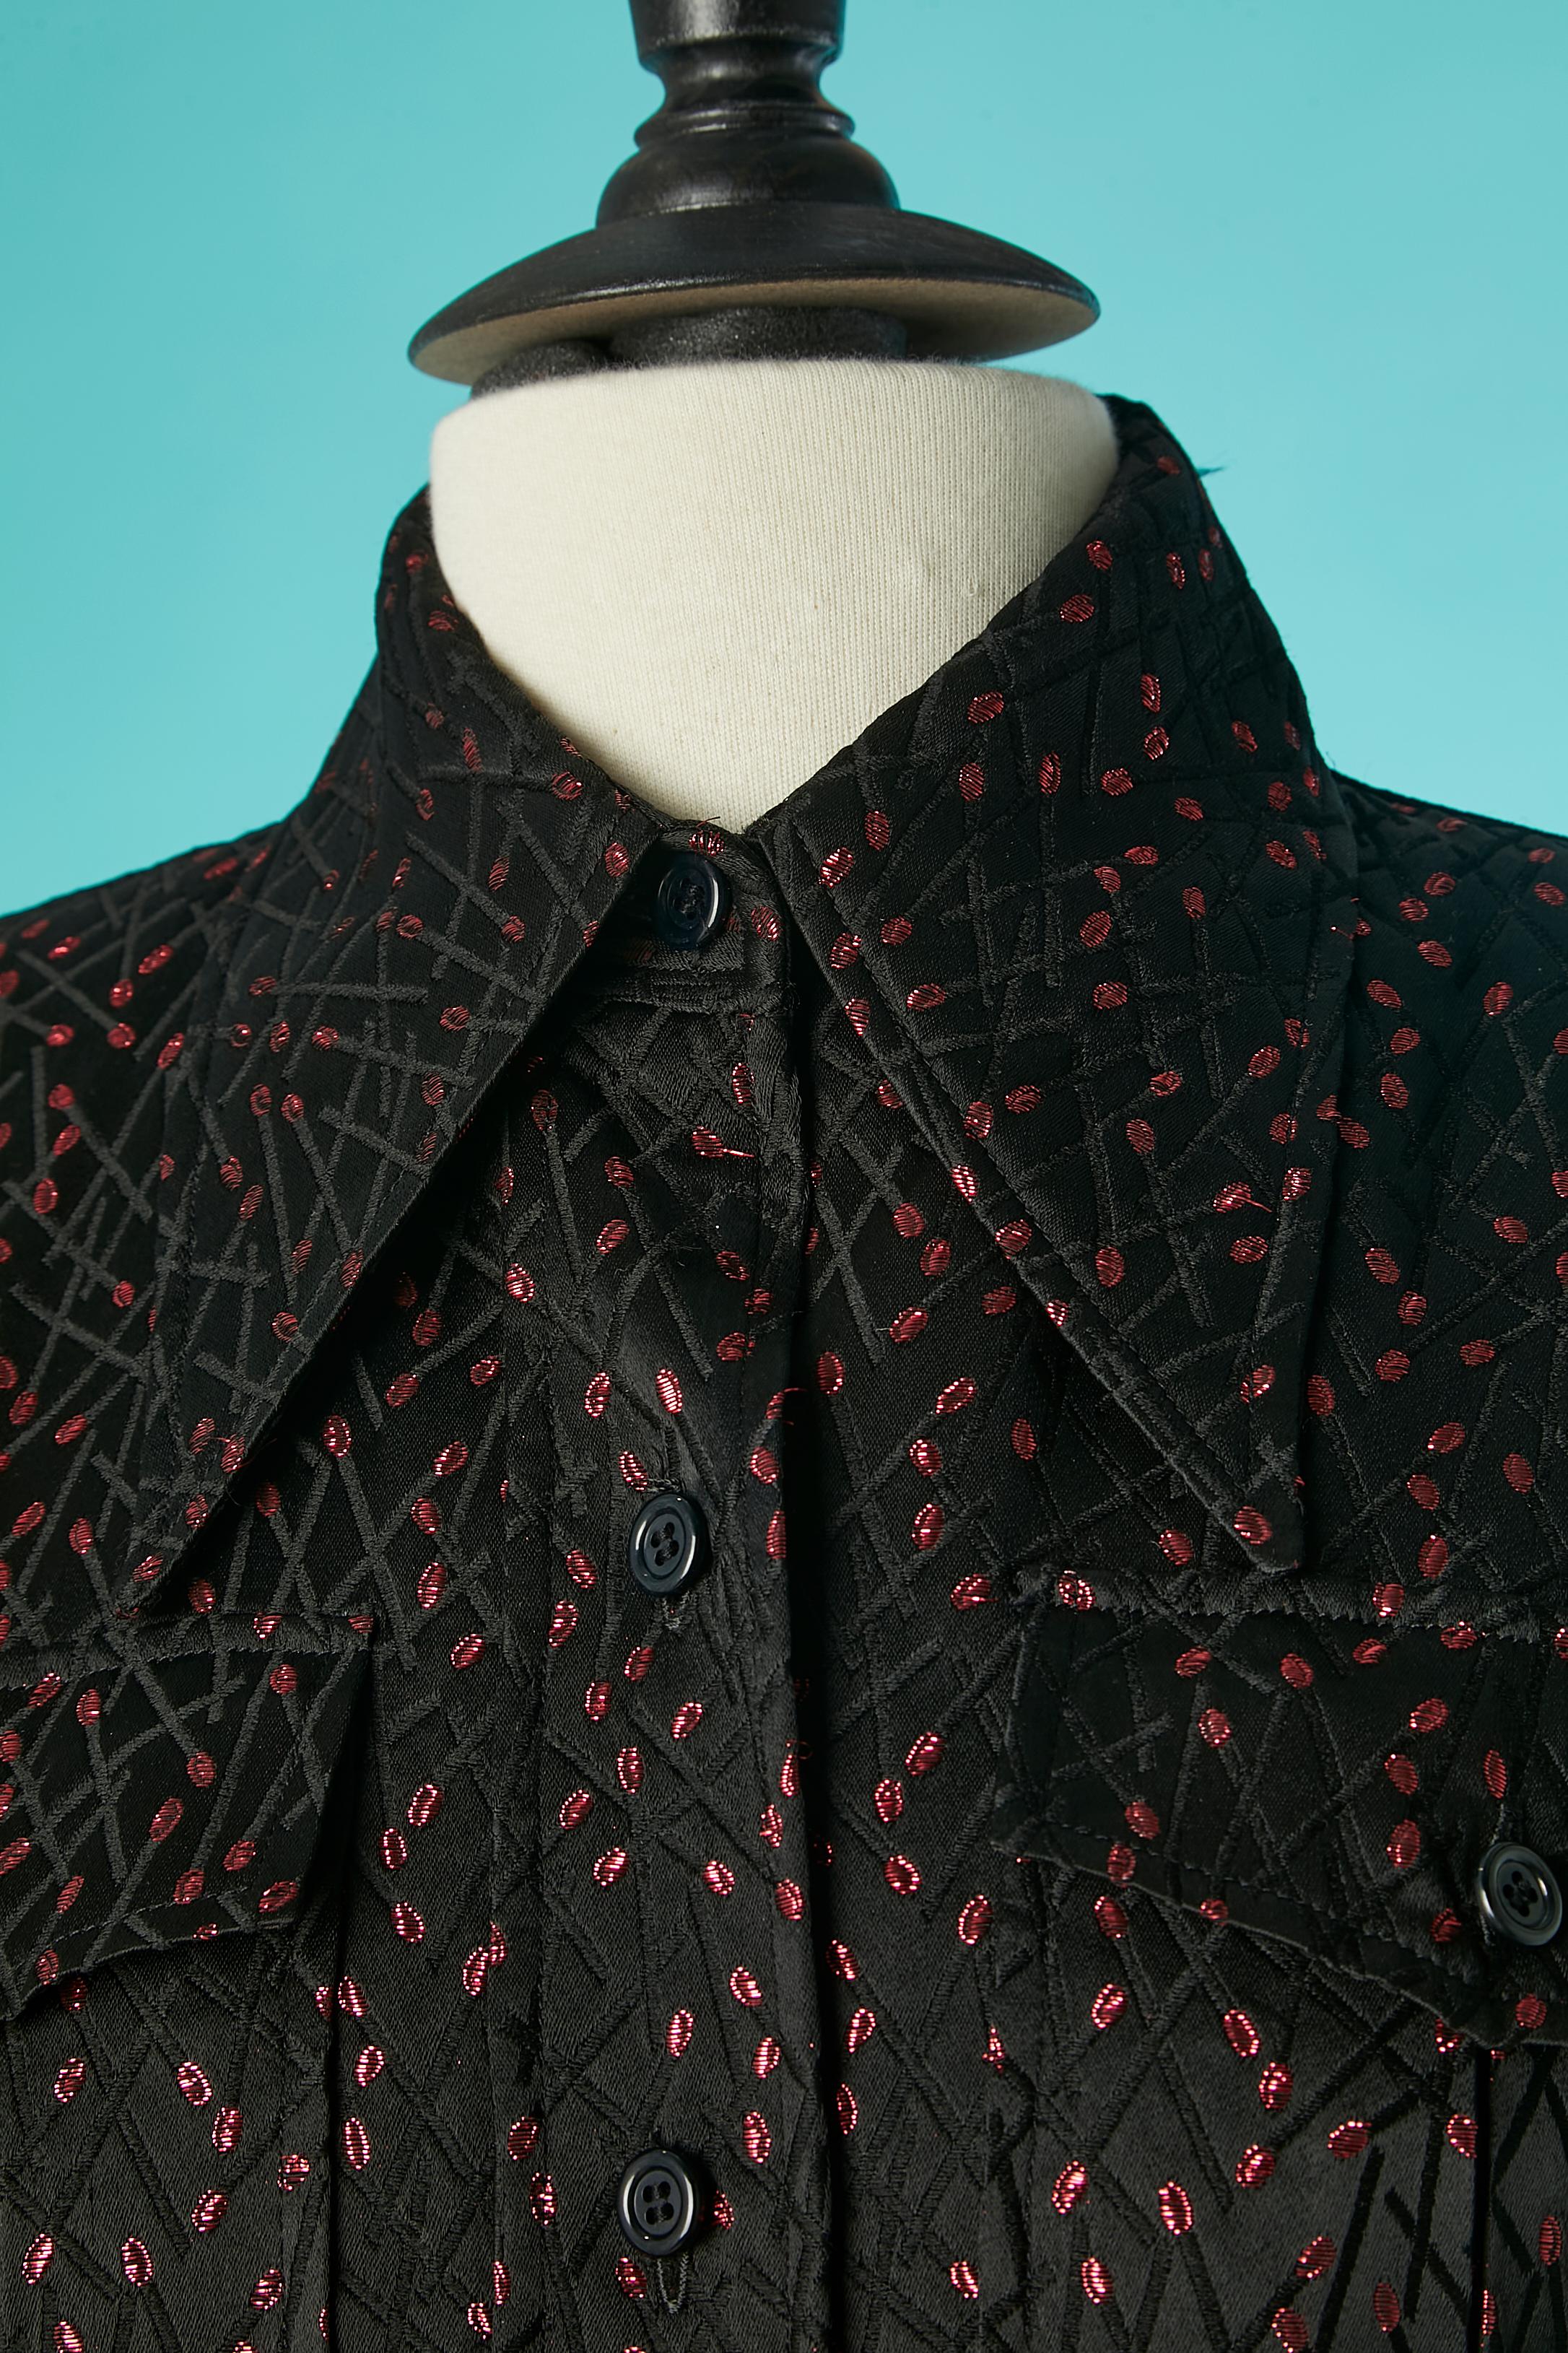 Black and red lurex jacquard shirt. Acetate or rayon lining. Shoulder pad. 2 belt-loop on the middle back ( no belt) 
Split in the middle back = 30 cm
size 38 (Fr) M 